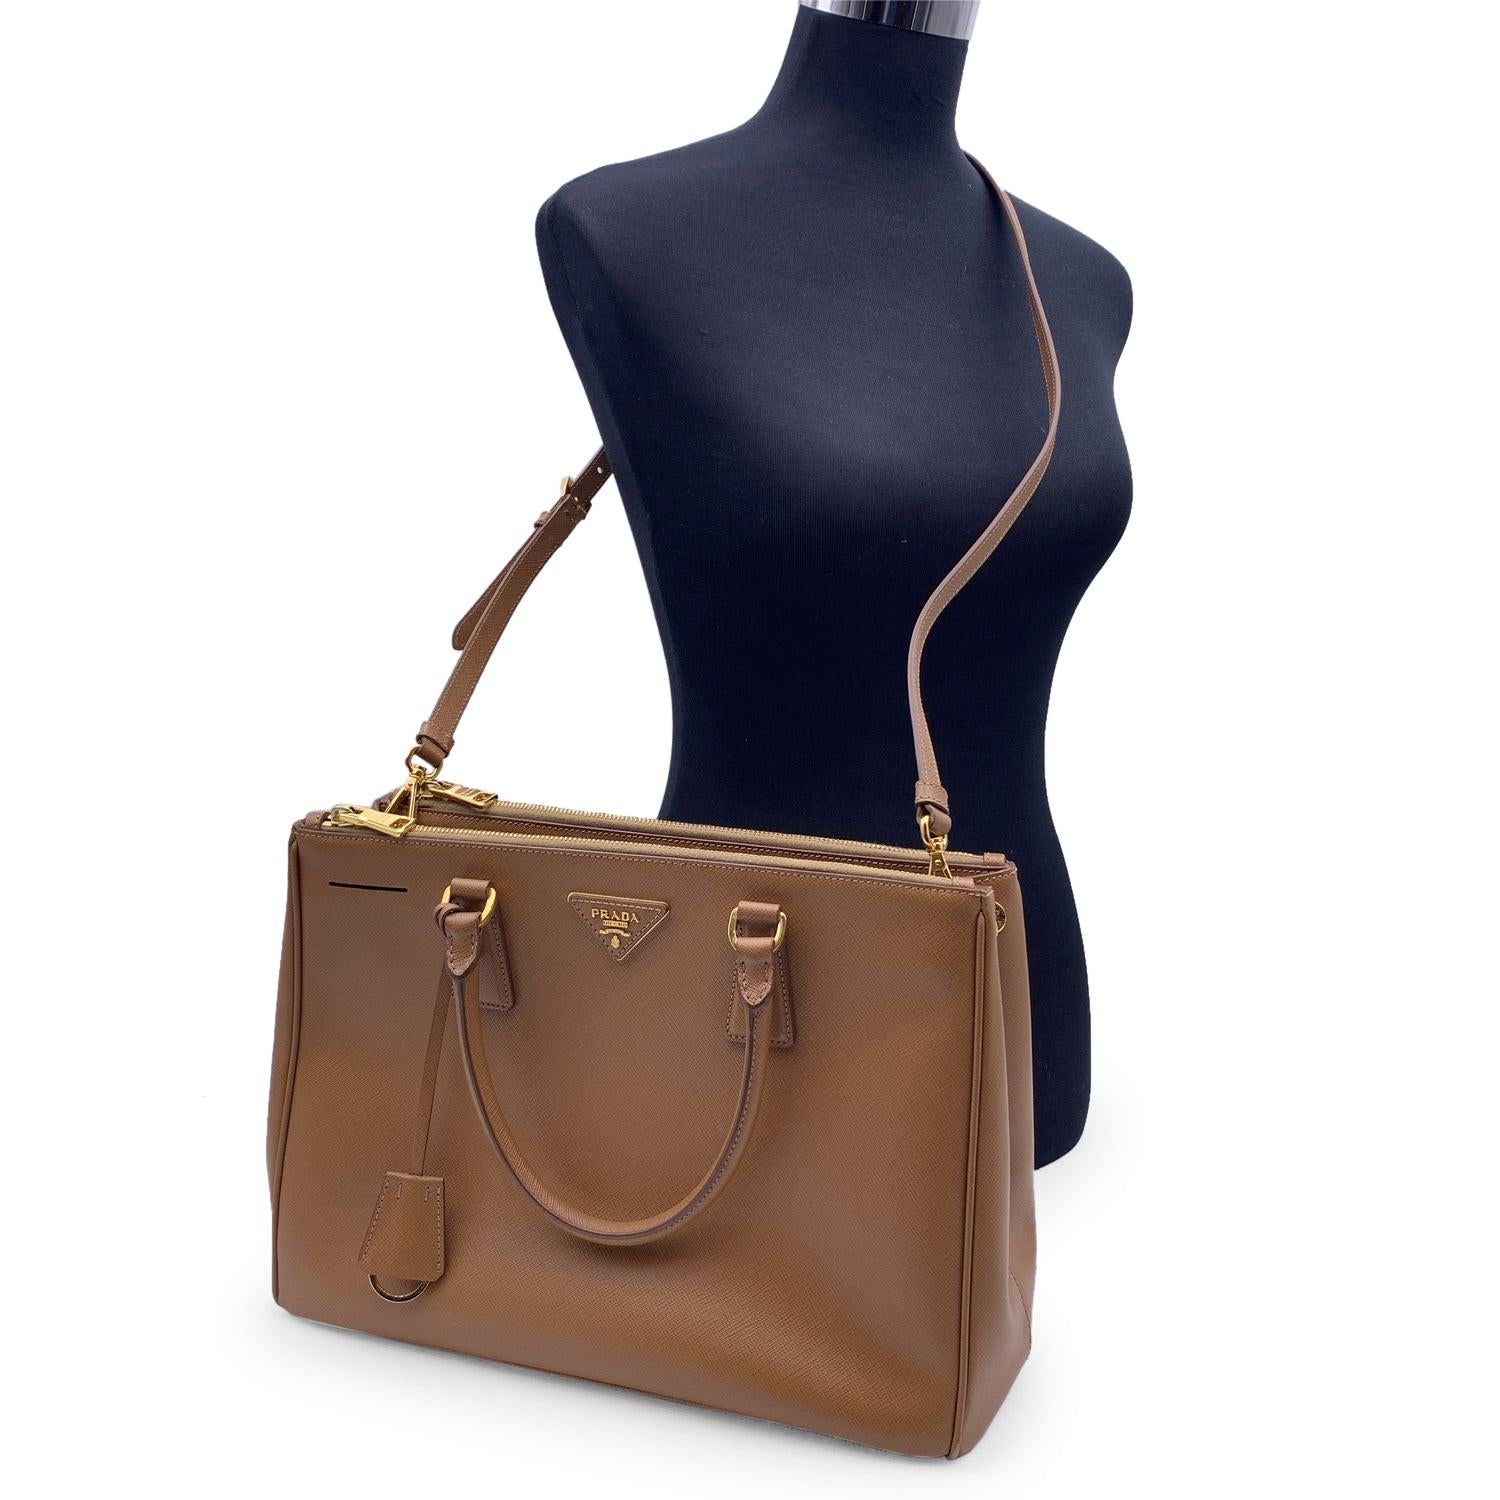 Stunning PRADA top handles bag/handbag mod. 'Galleria', designed in different shades of tan Saffiano leather and finished with leather triangle logo on the front, all in a structured tote silhouette. It features double round top handles and